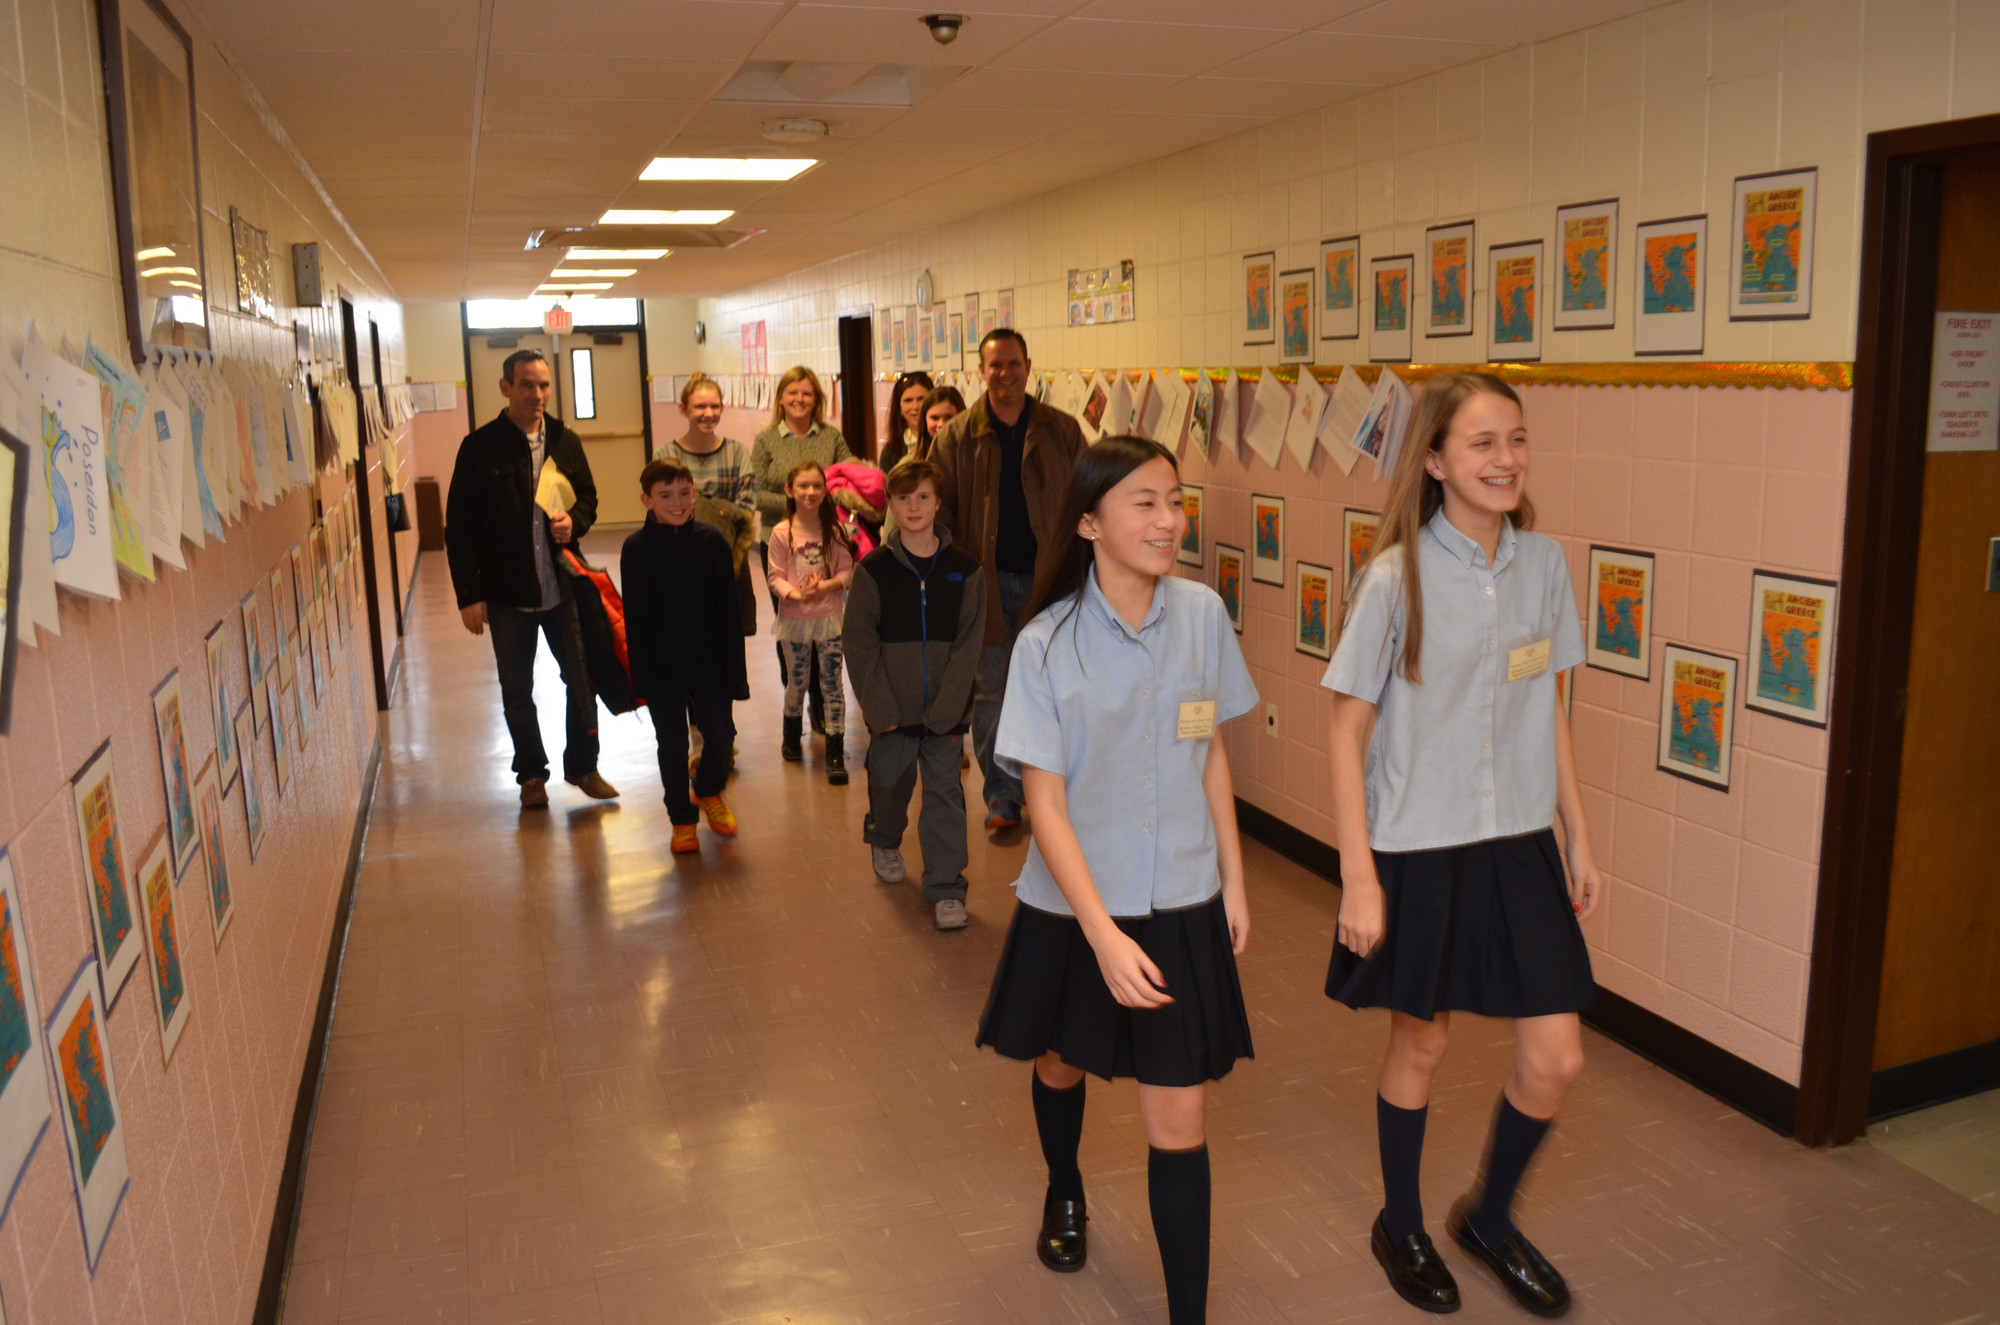 Seventh Grade St. Agnes students Megan Tierney and Kelly Sullivan gave a tour to parents and prospective students during the school’s open house on Jan. 25.